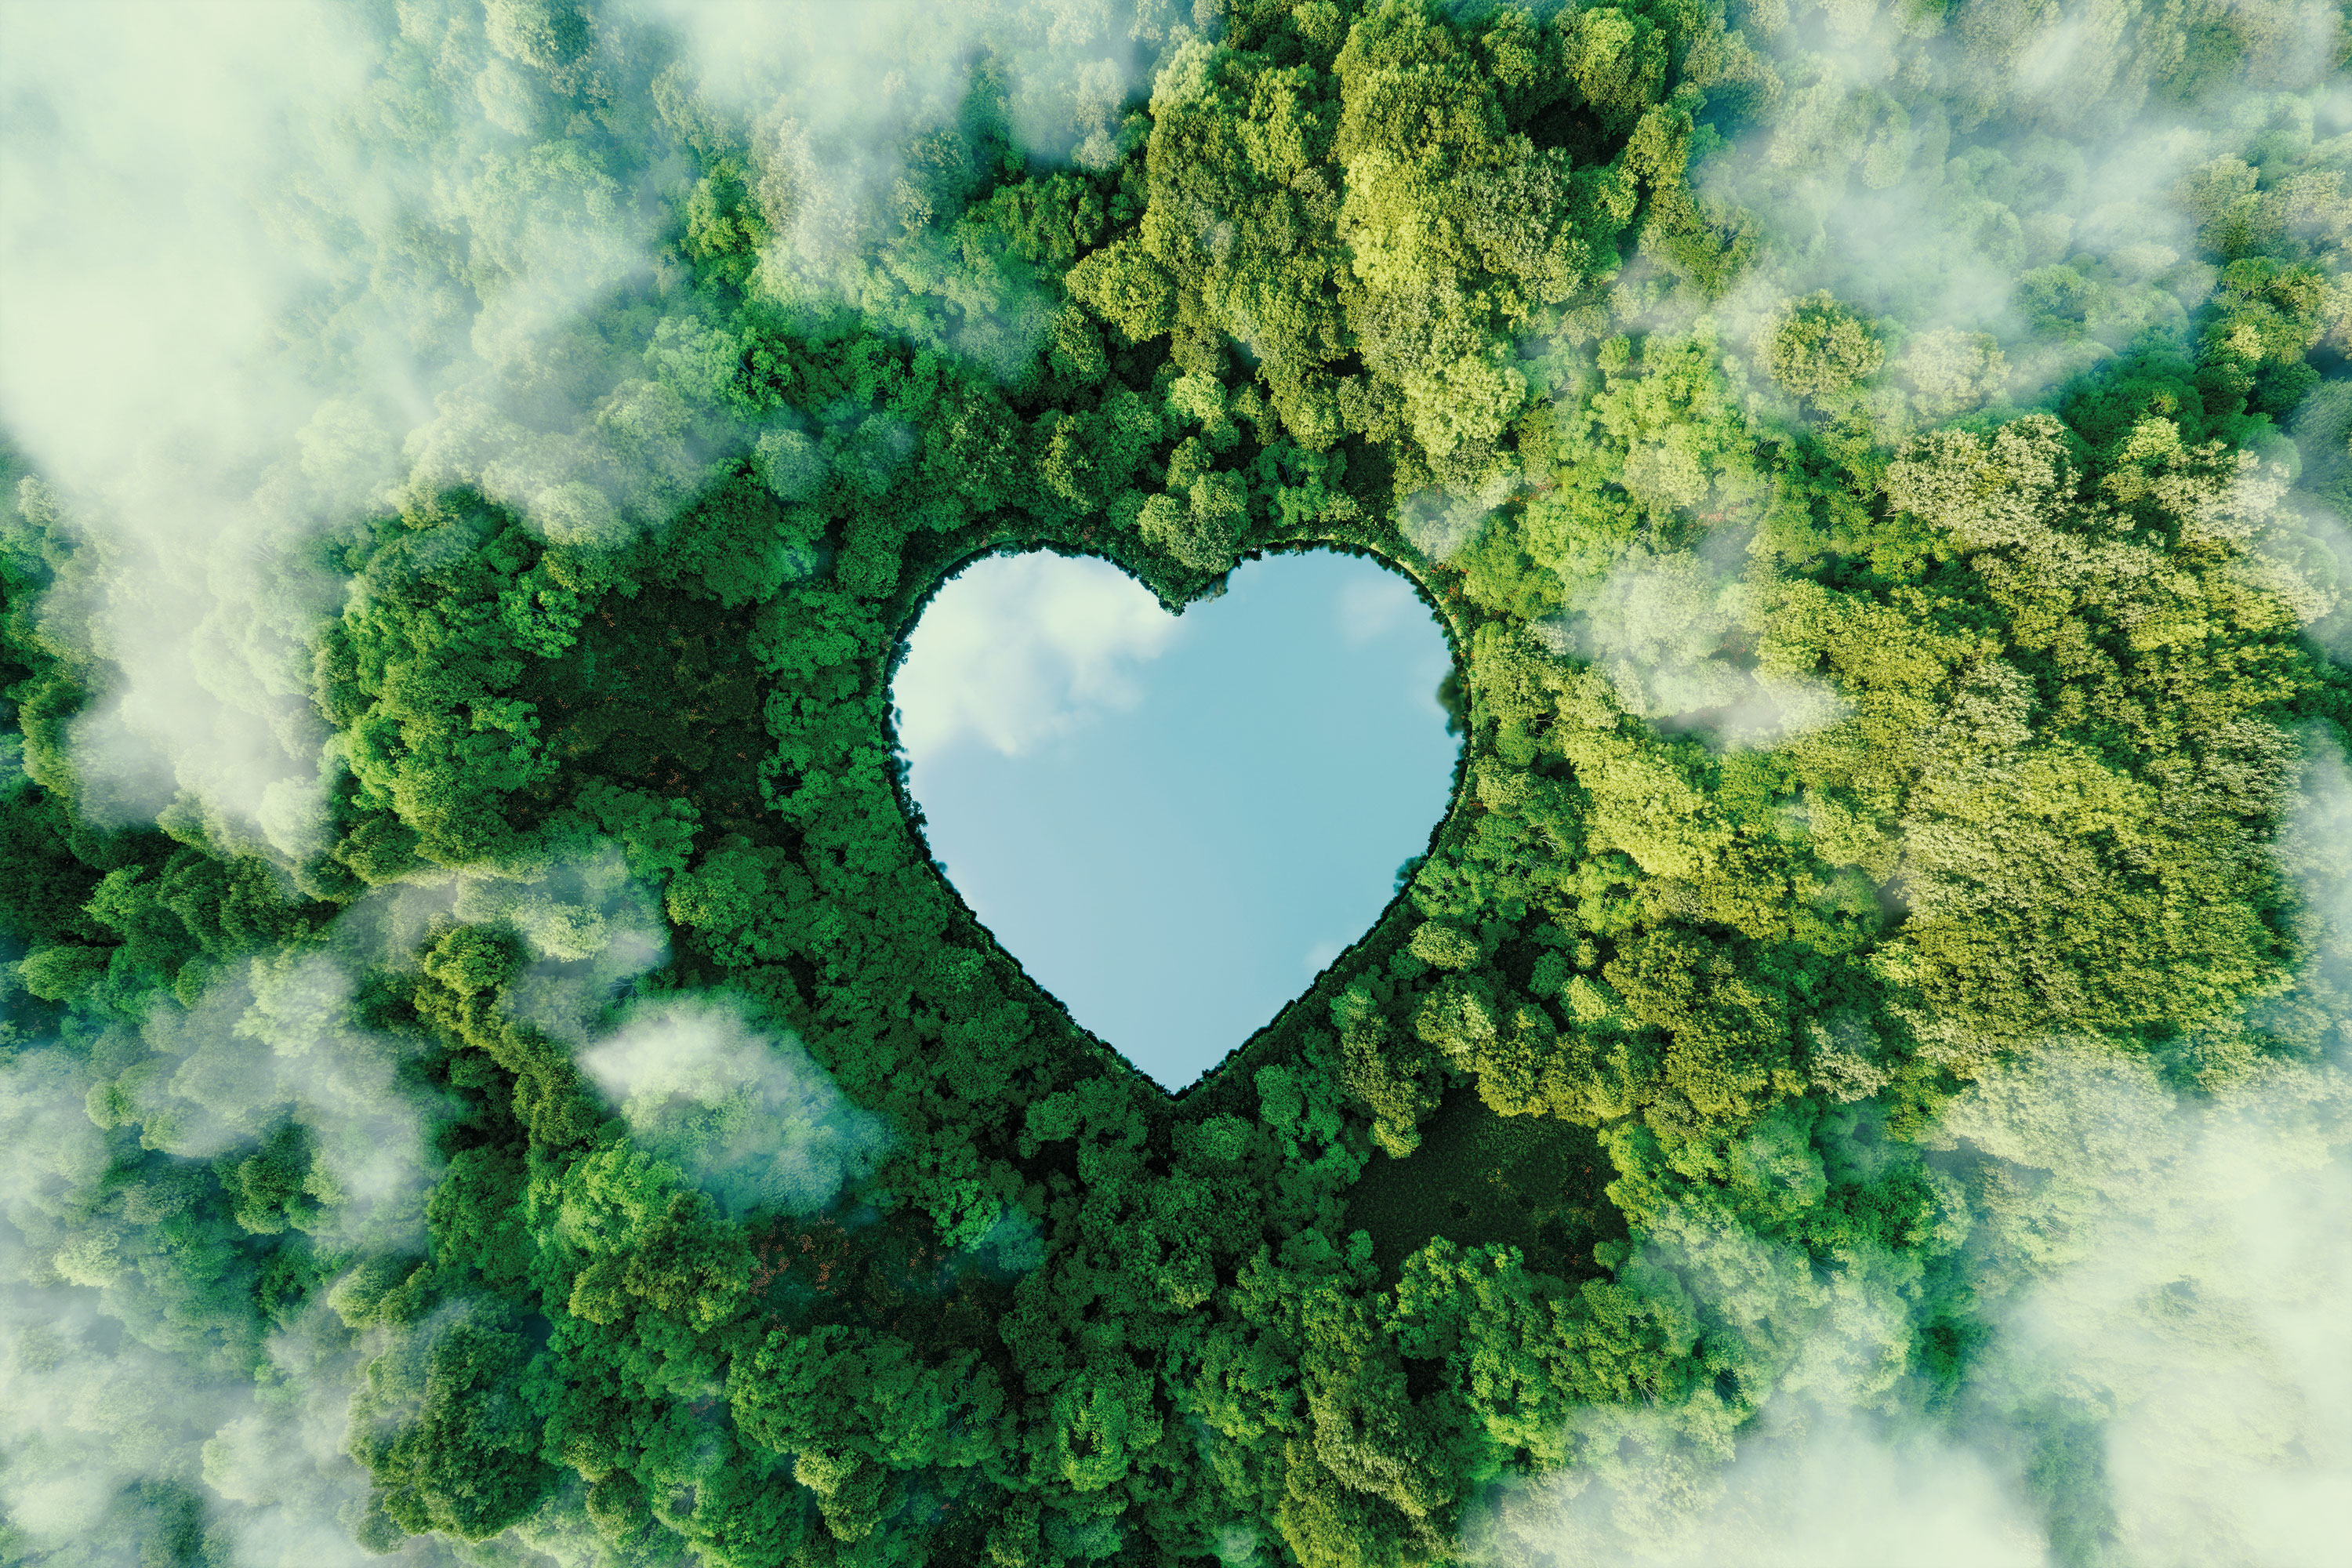 A heart shaped lake in a thick forest